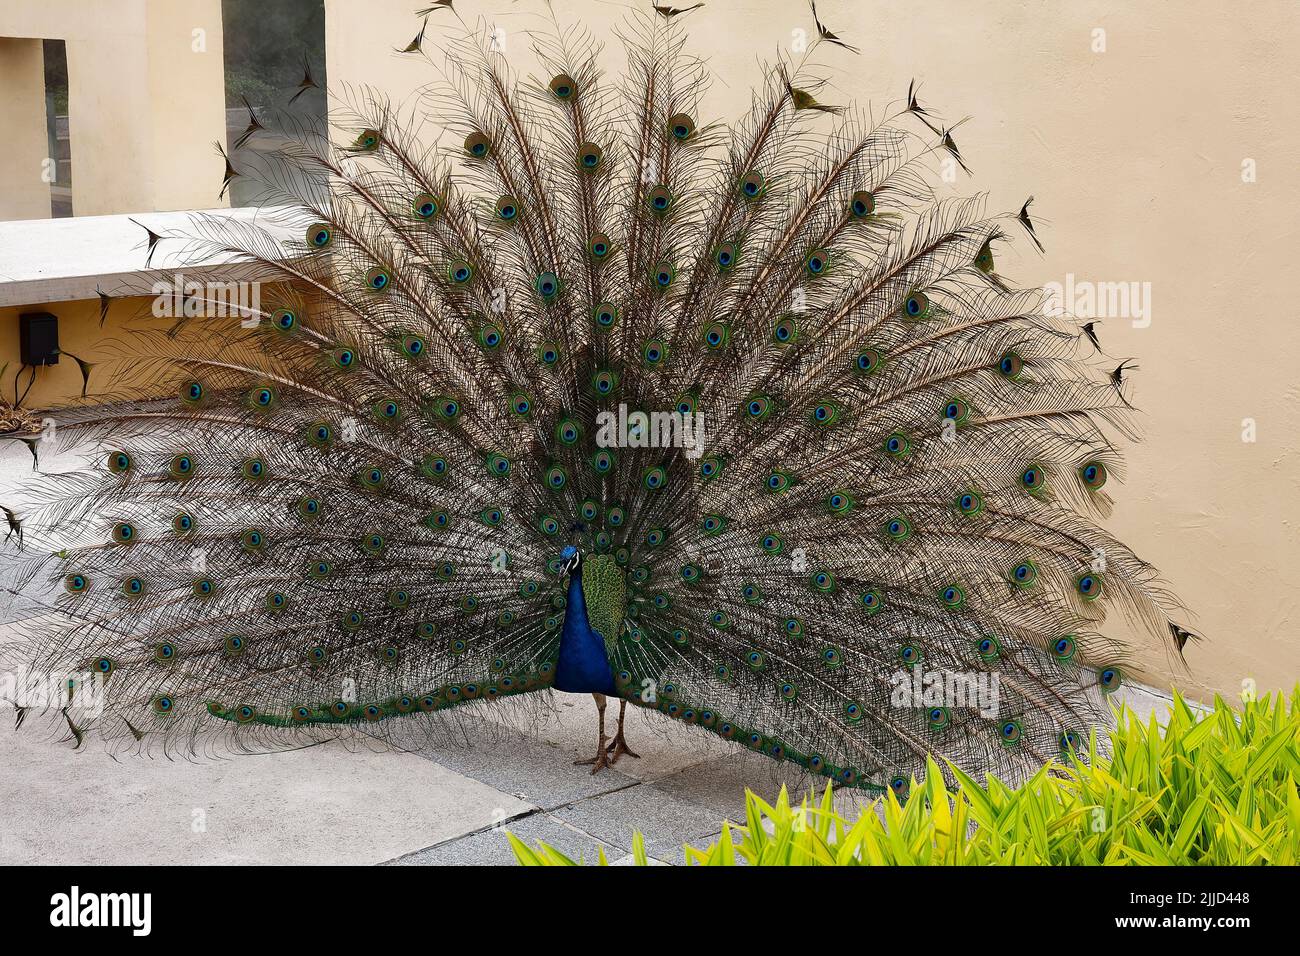 peacock portrait, full front view, tail feathers spread in large fan, colorful bird, Indian peafowl, Seward Johnson Center for the Arts; Grounds for S Stock Photo